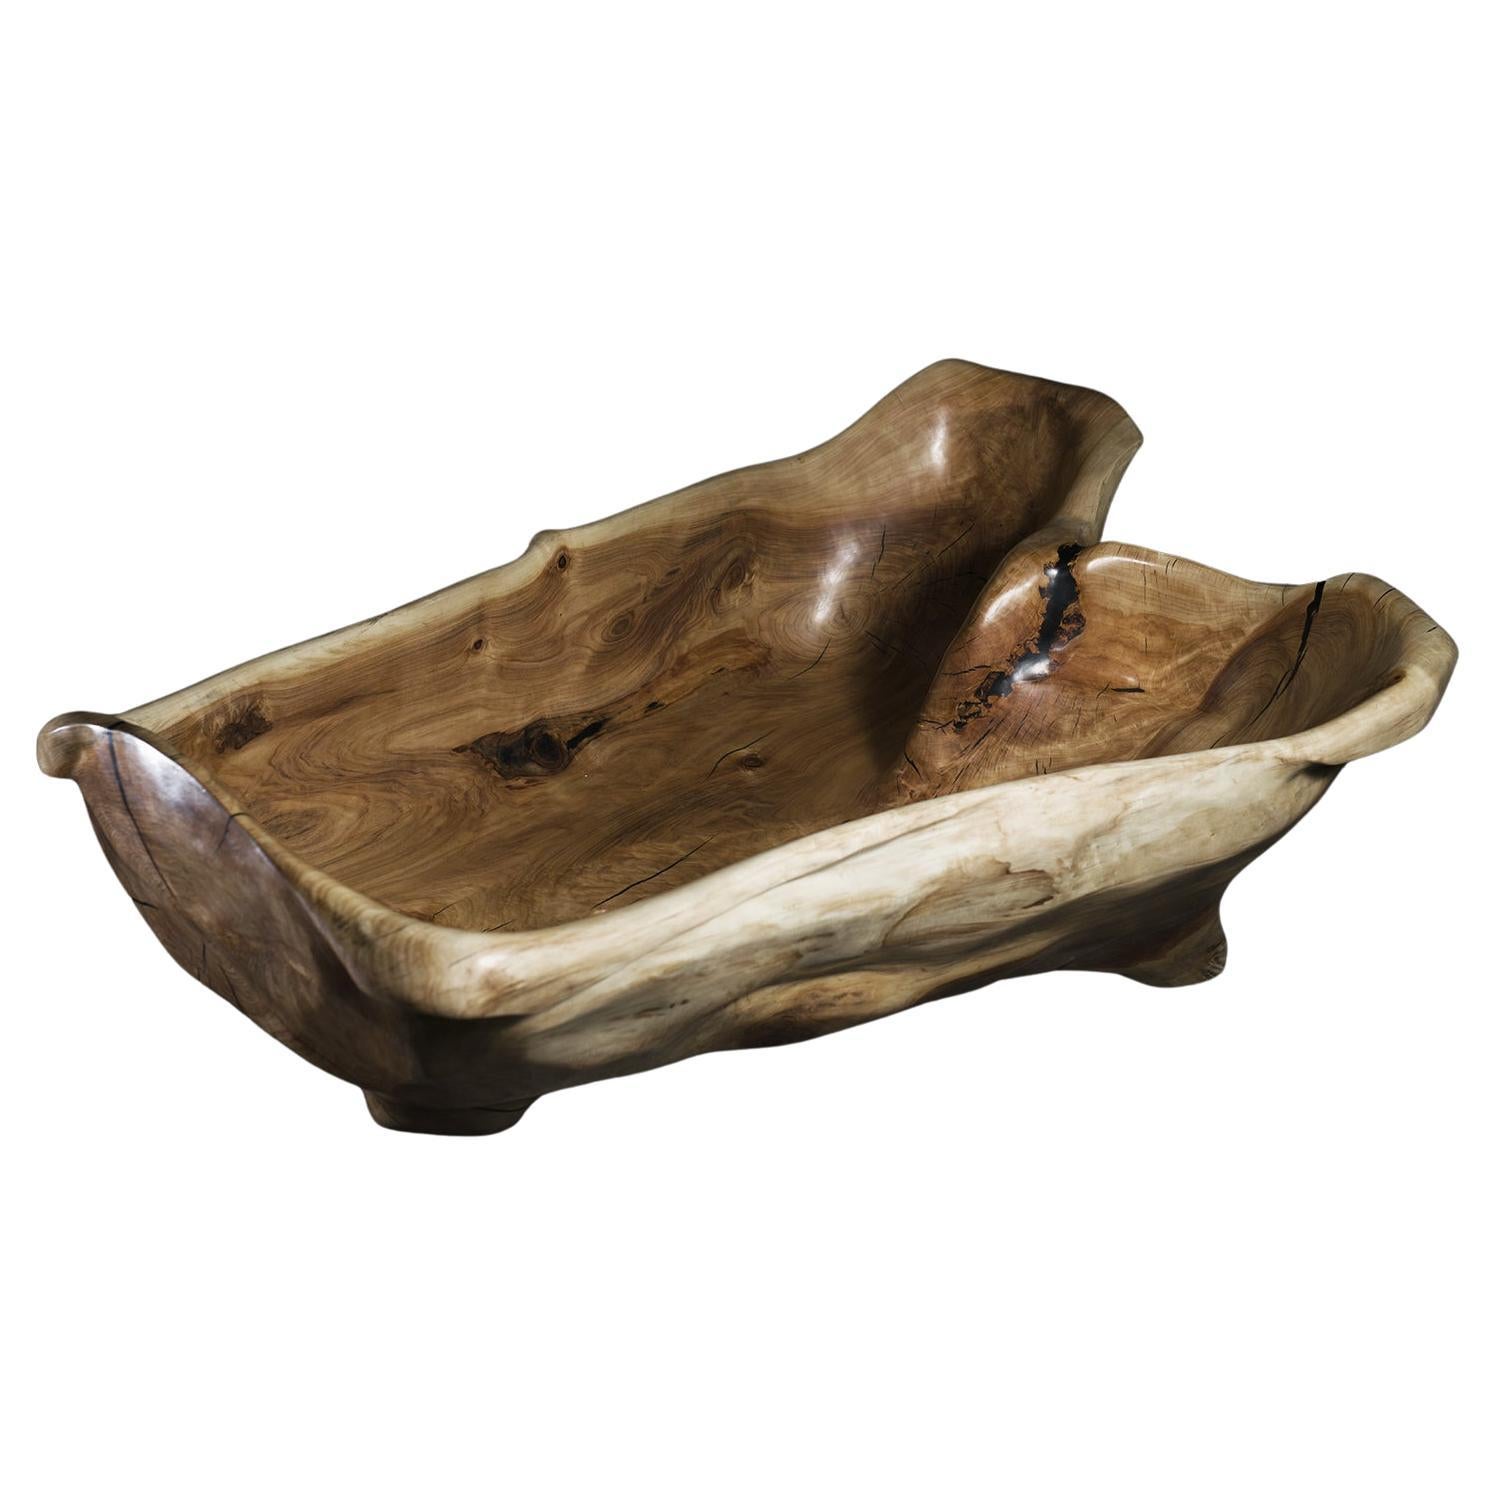 Solid Wood Bathtub Carved from Single Piece of Wood, Fully functional, Logniture For Sale